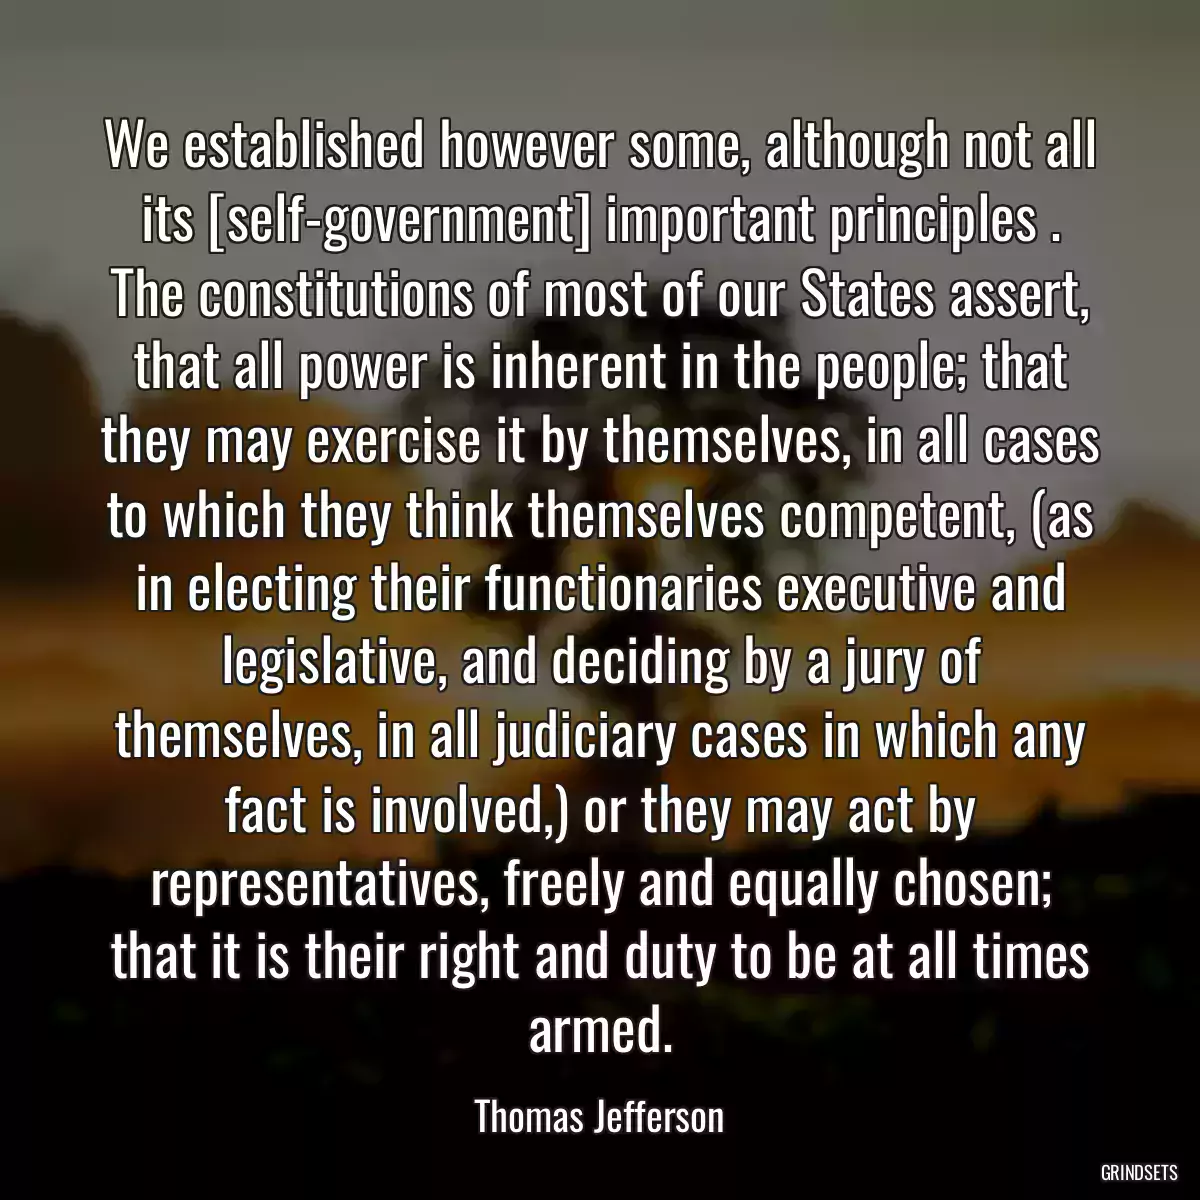 We established however some, although not all its [self-government] important principles . The constitutions of most of our States assert, that all power is inherent in the people; that they may exercise it by themselves, in all cases to which they think themselves competent, (as in electing their functionaries executive and legislative, and deciding by a jury of themselves, in all judiciary cases in which any fact is involved,) or they may act by representatives, freely and equally chosen; that it is their right and duty to be at all times armed.